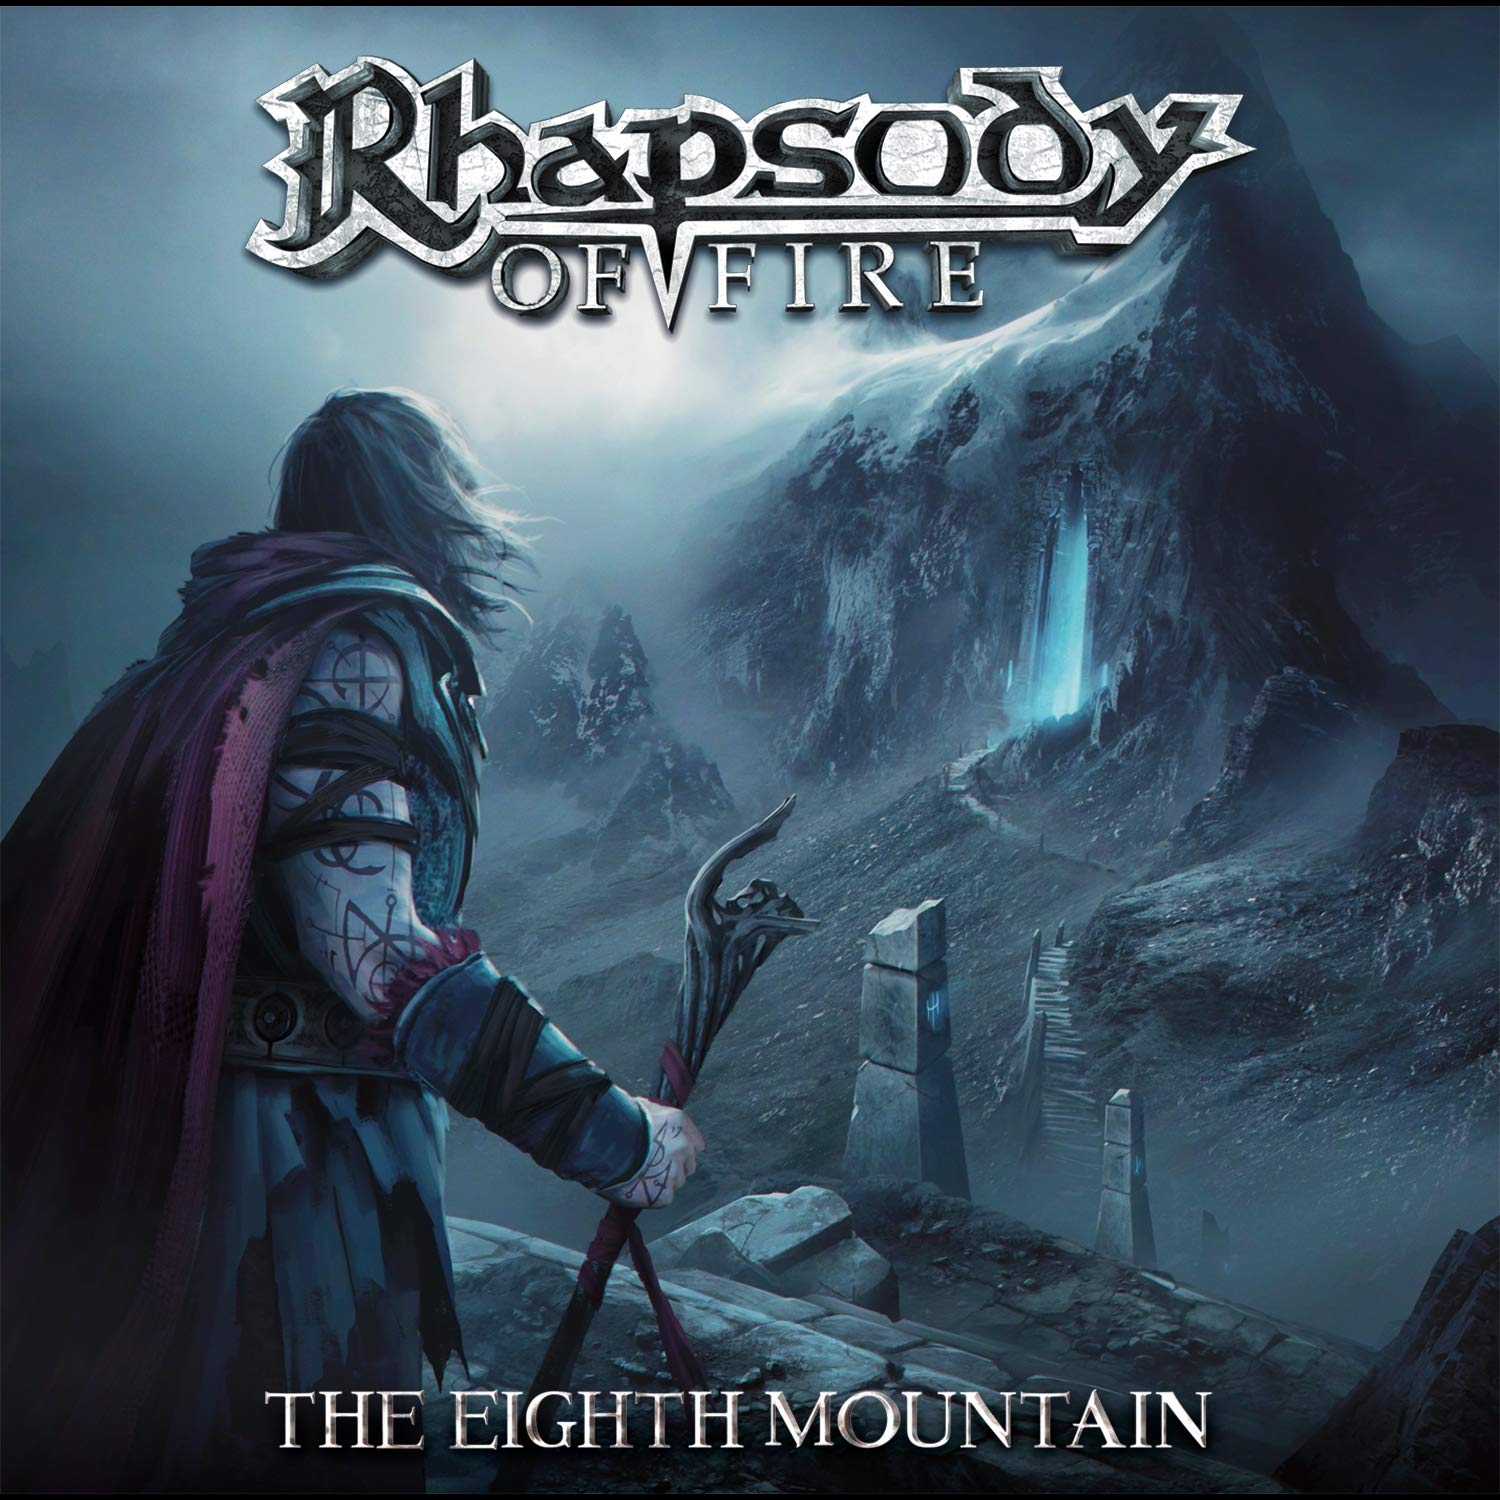 Rhapsody of Fire: The Eighth Mountain